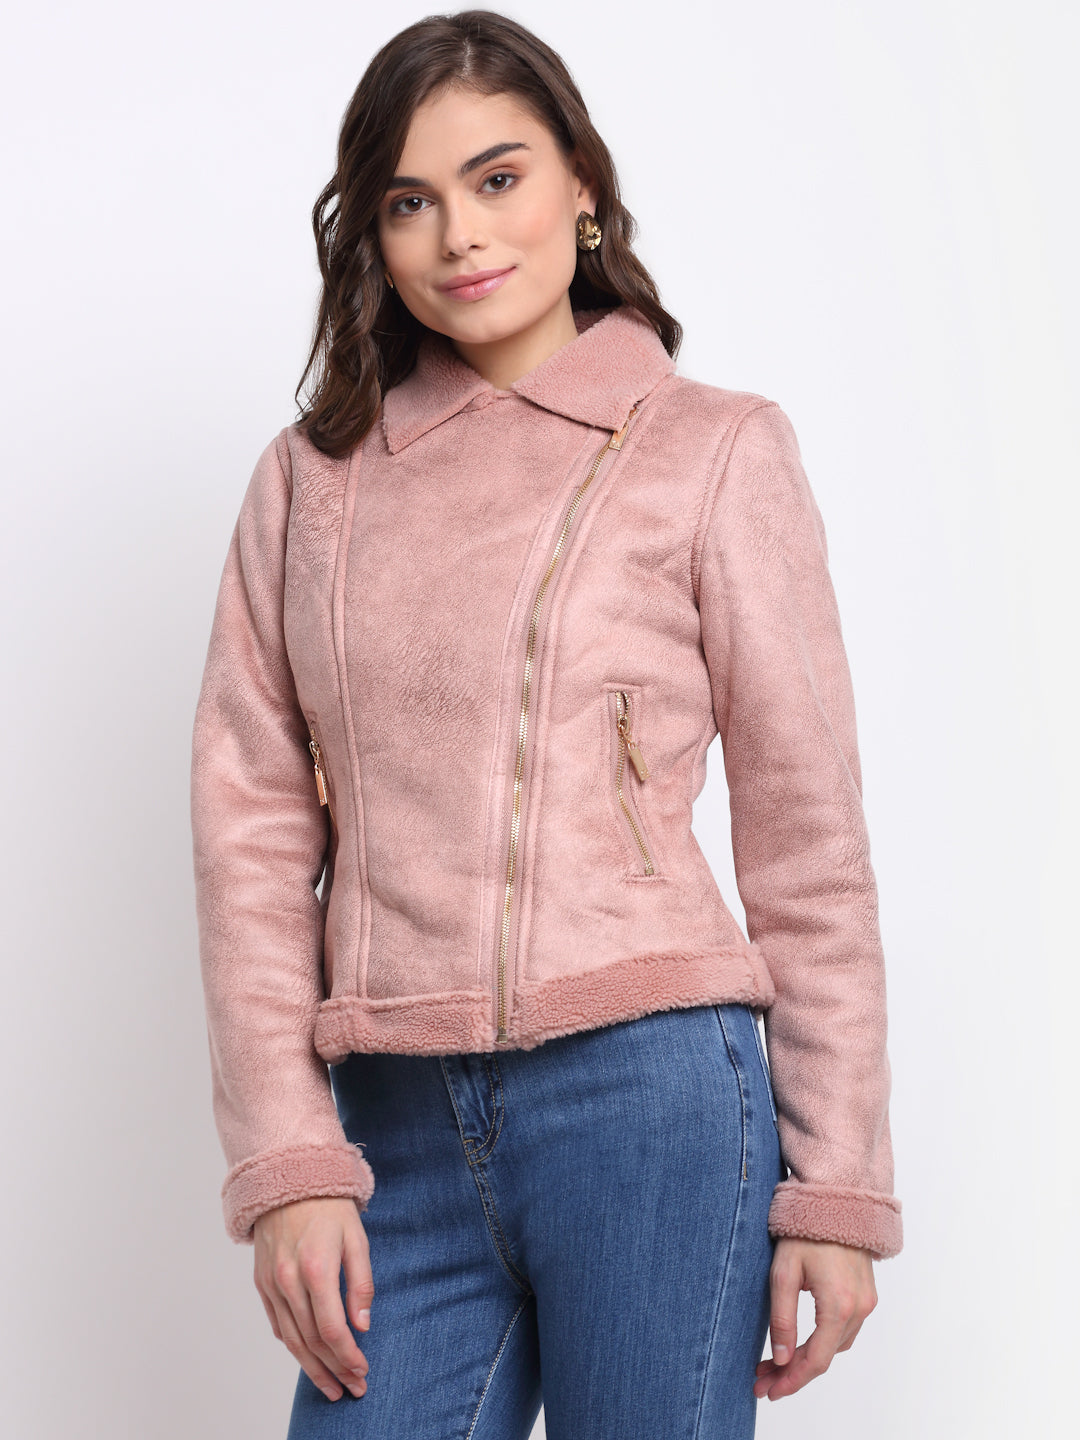 Women Pink Collared Solid Jacket